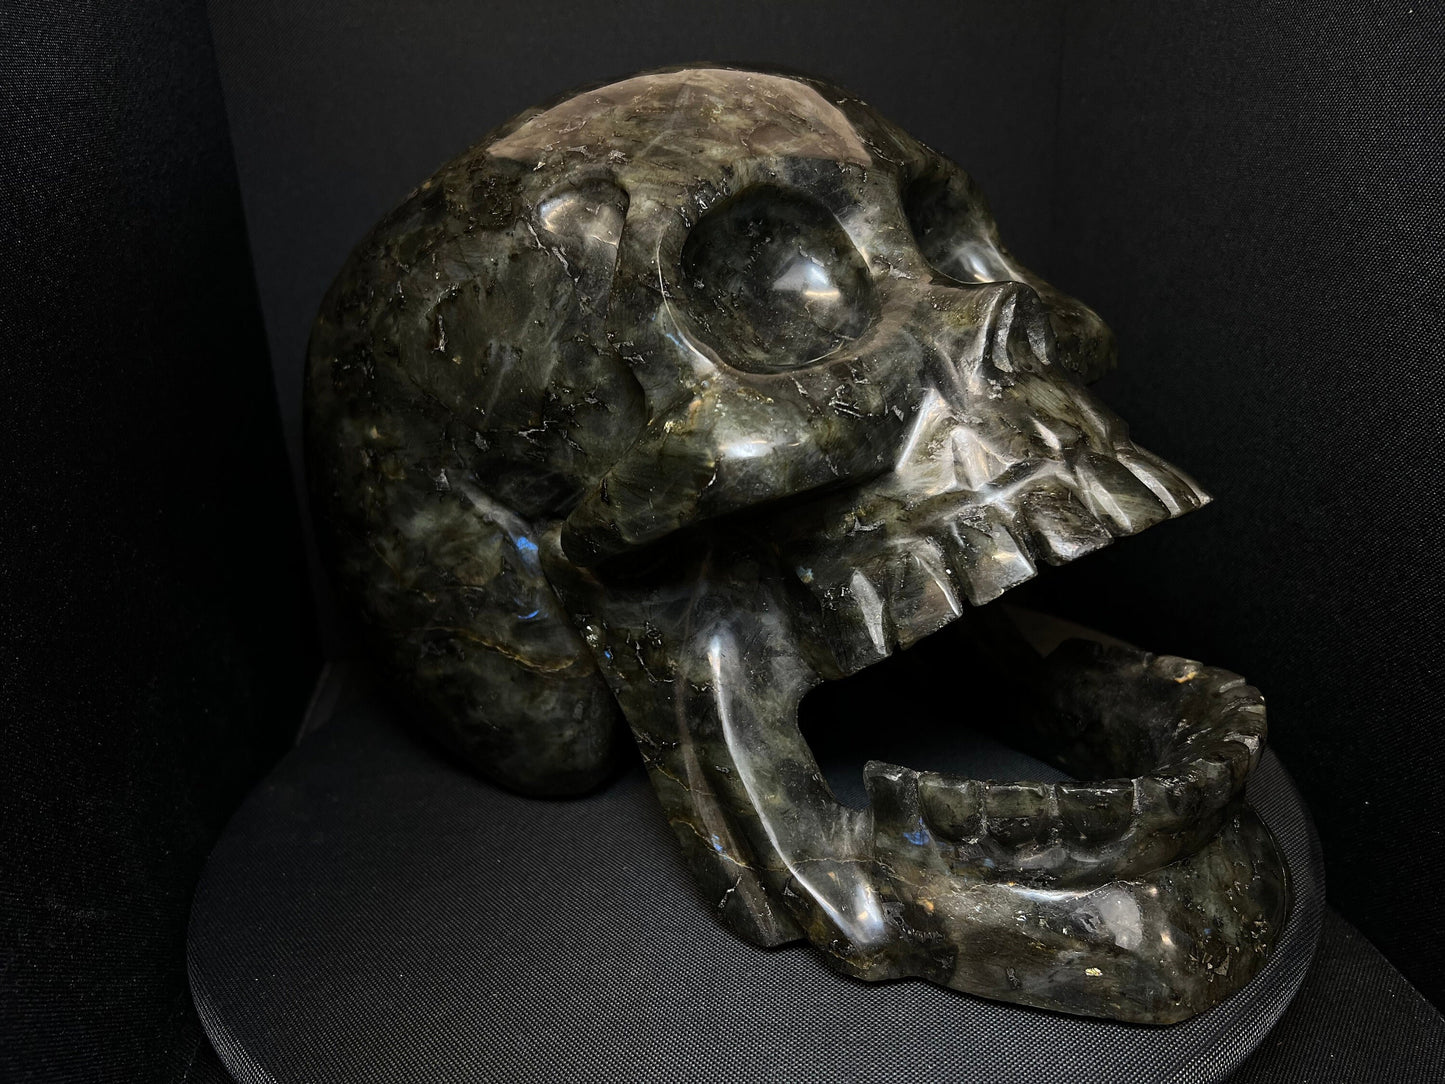 A large Polished Perfectly Carved Skull in Labradorite Stone- Statement Piece, Home Décor